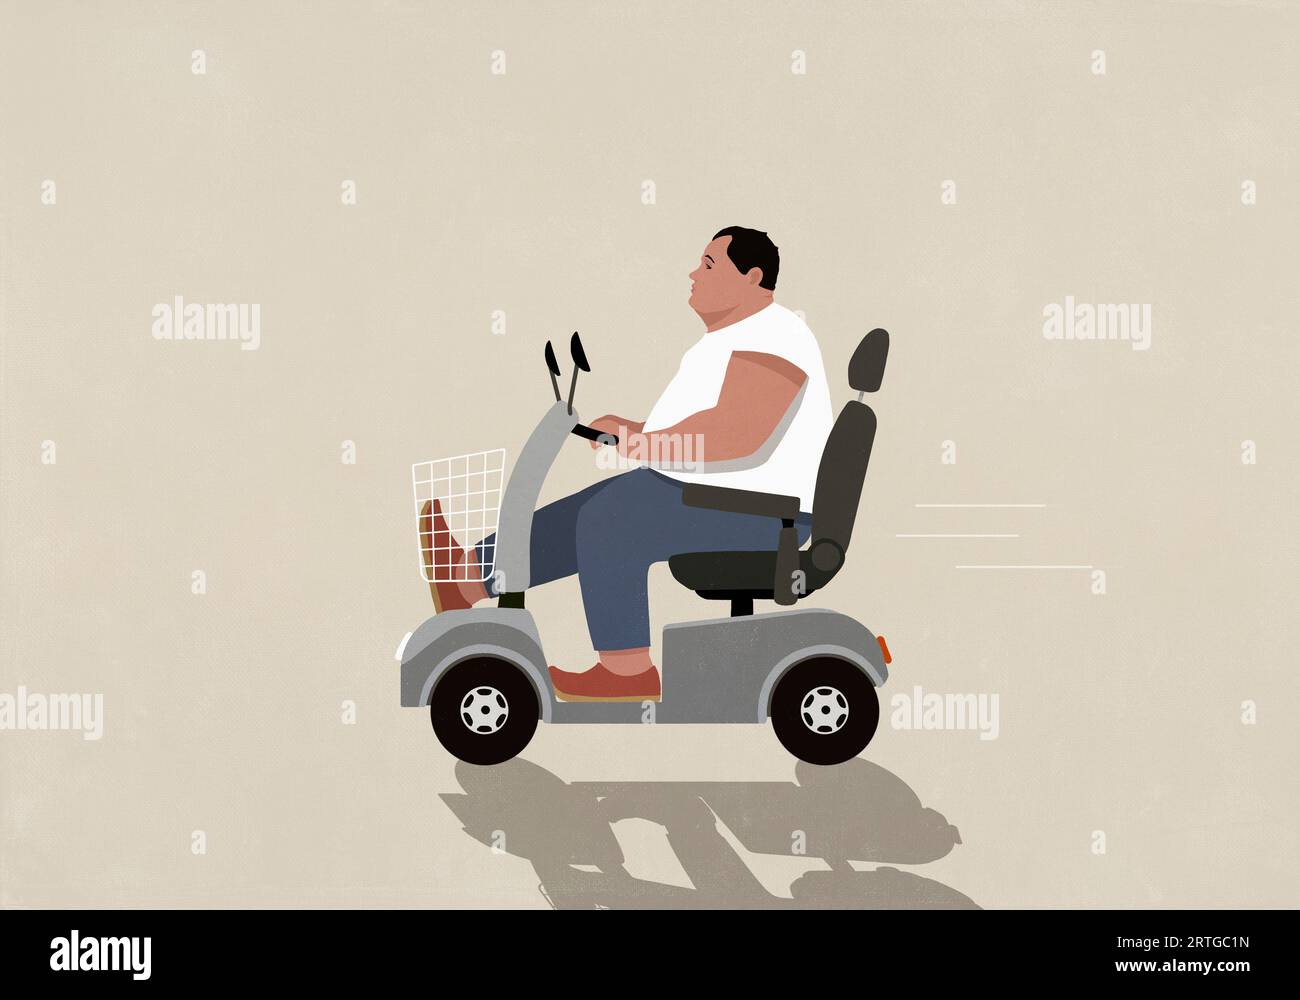 Overweight man riding motor scooter Stock Photo